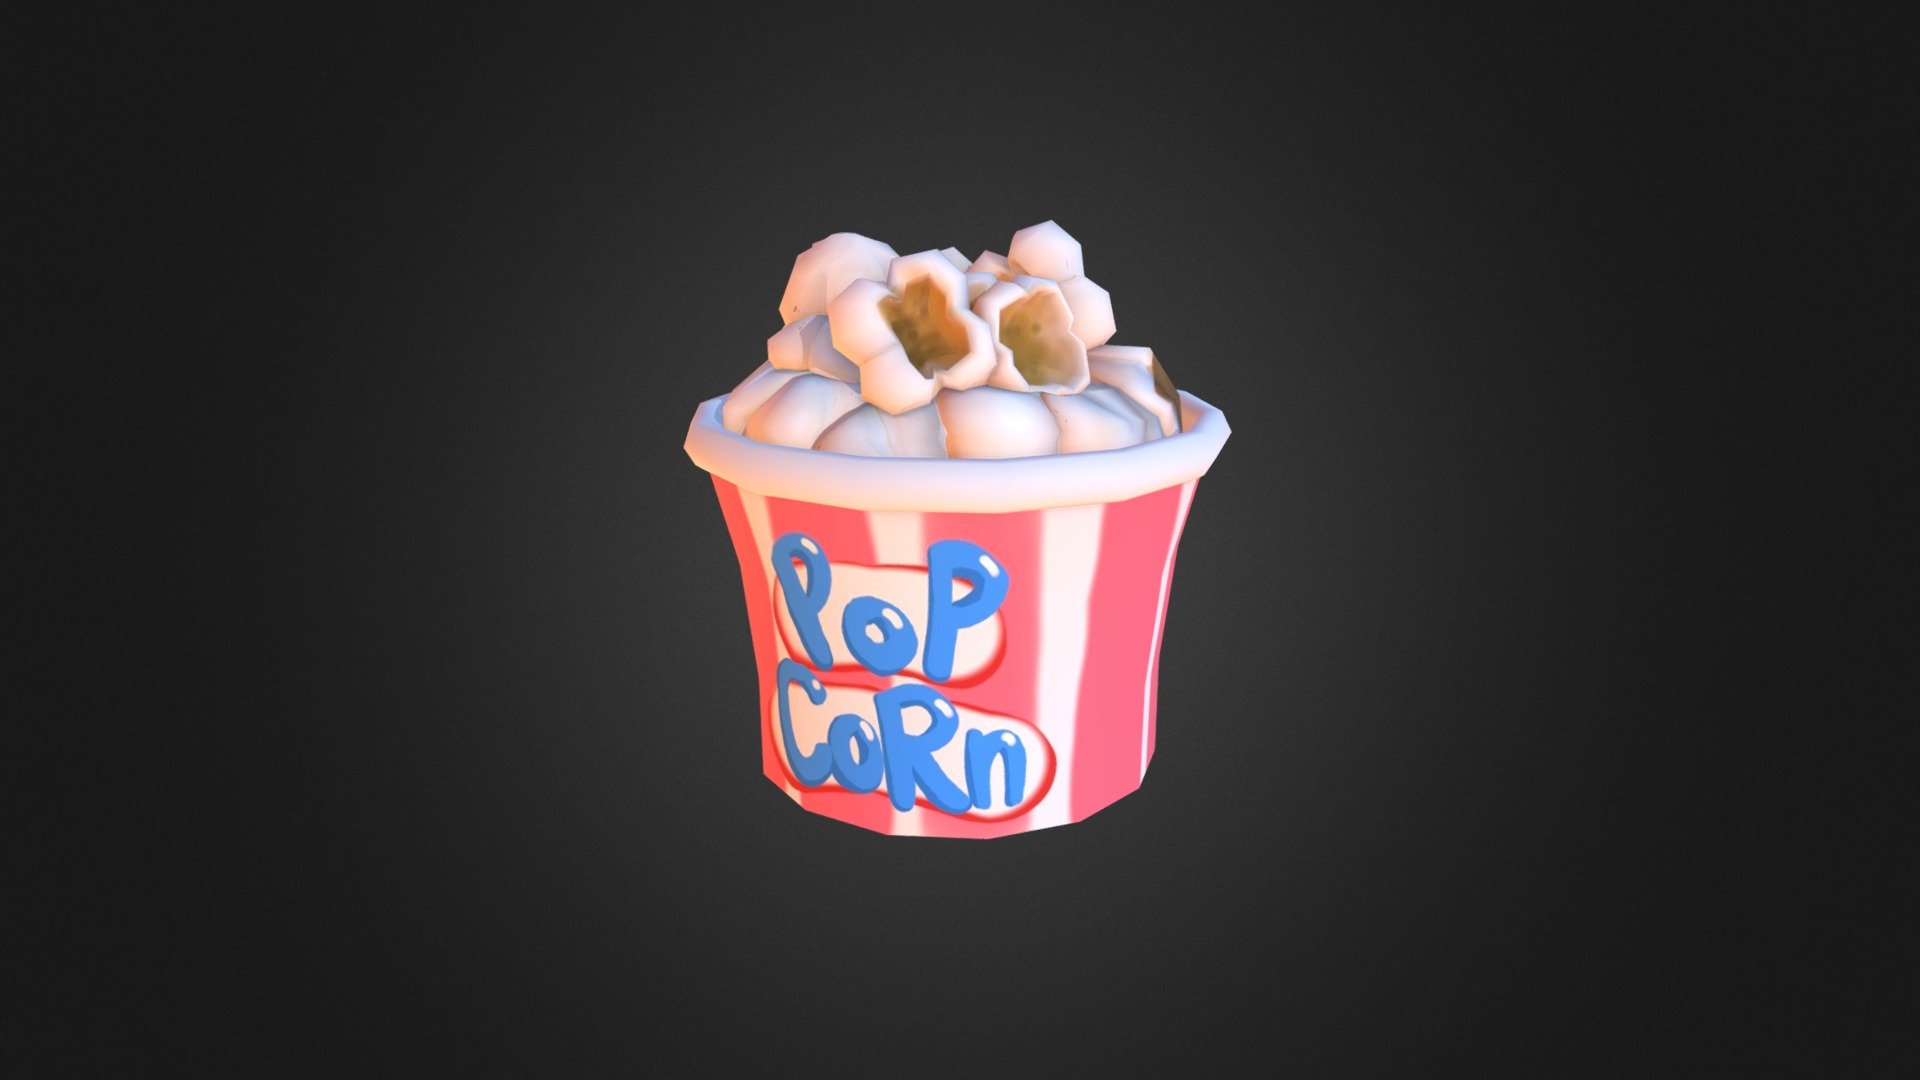 Scronch, scronch&hellip; One small Pop Corn bucket to watch your favorite movie !
Modeled in maya and painted in substance painter.
Originaly made for VR app CineVR 3d model